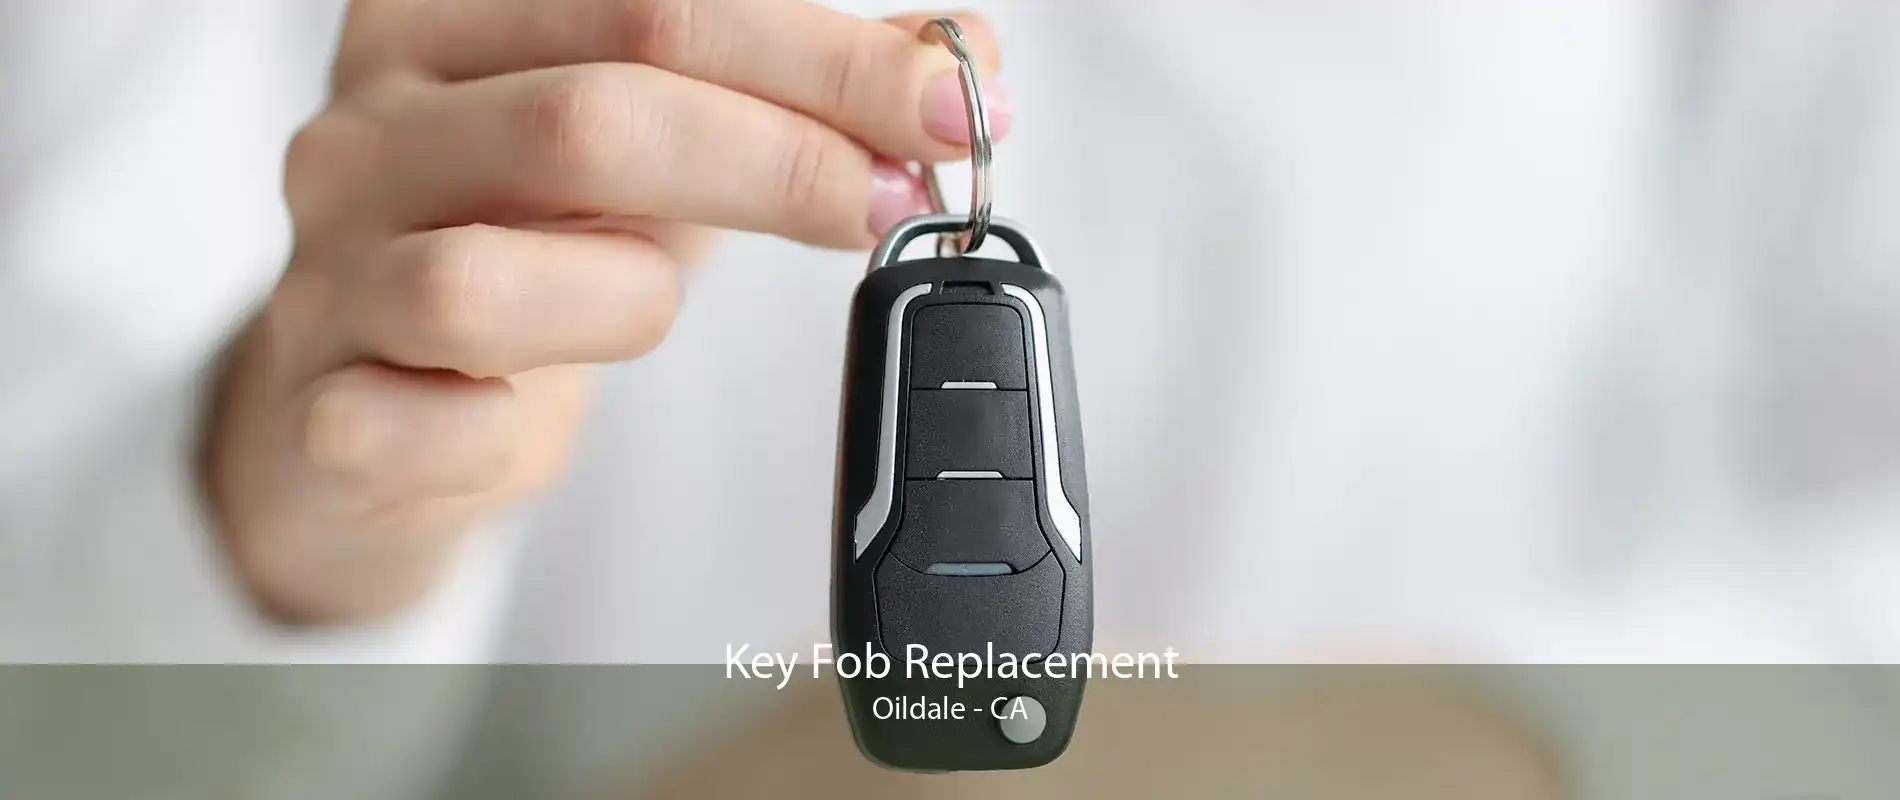 Key Fob Replacement Oildale - CA